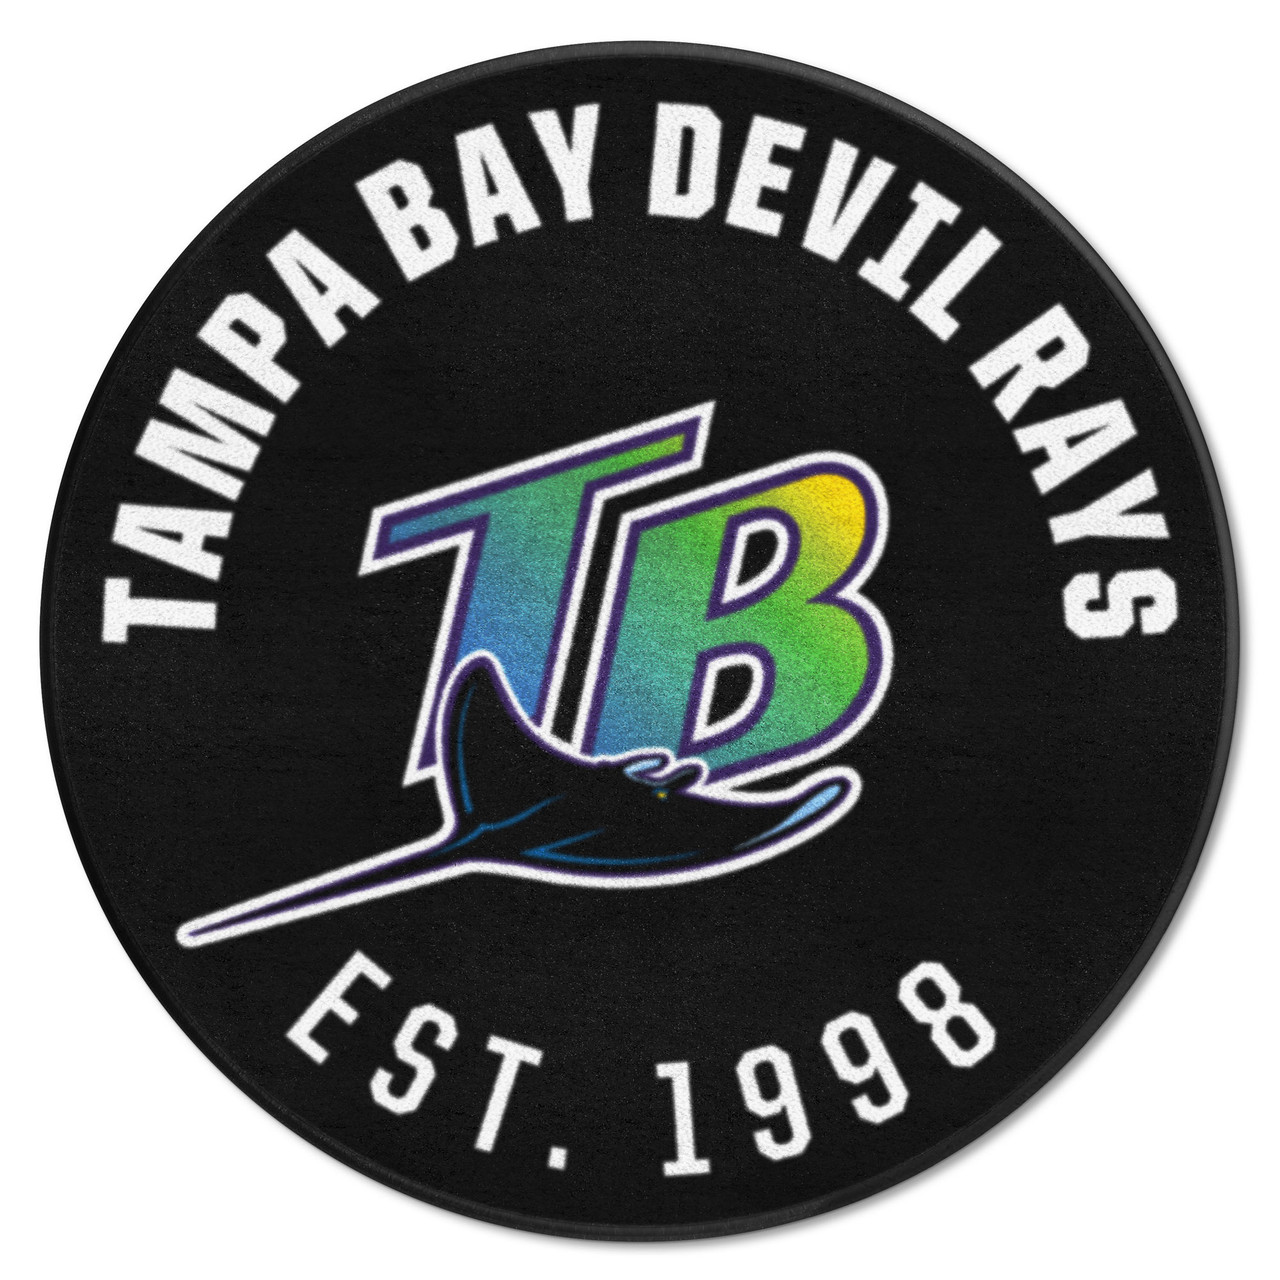 Tampa Bay Devil Rays Roundel Mat - Retro Collection